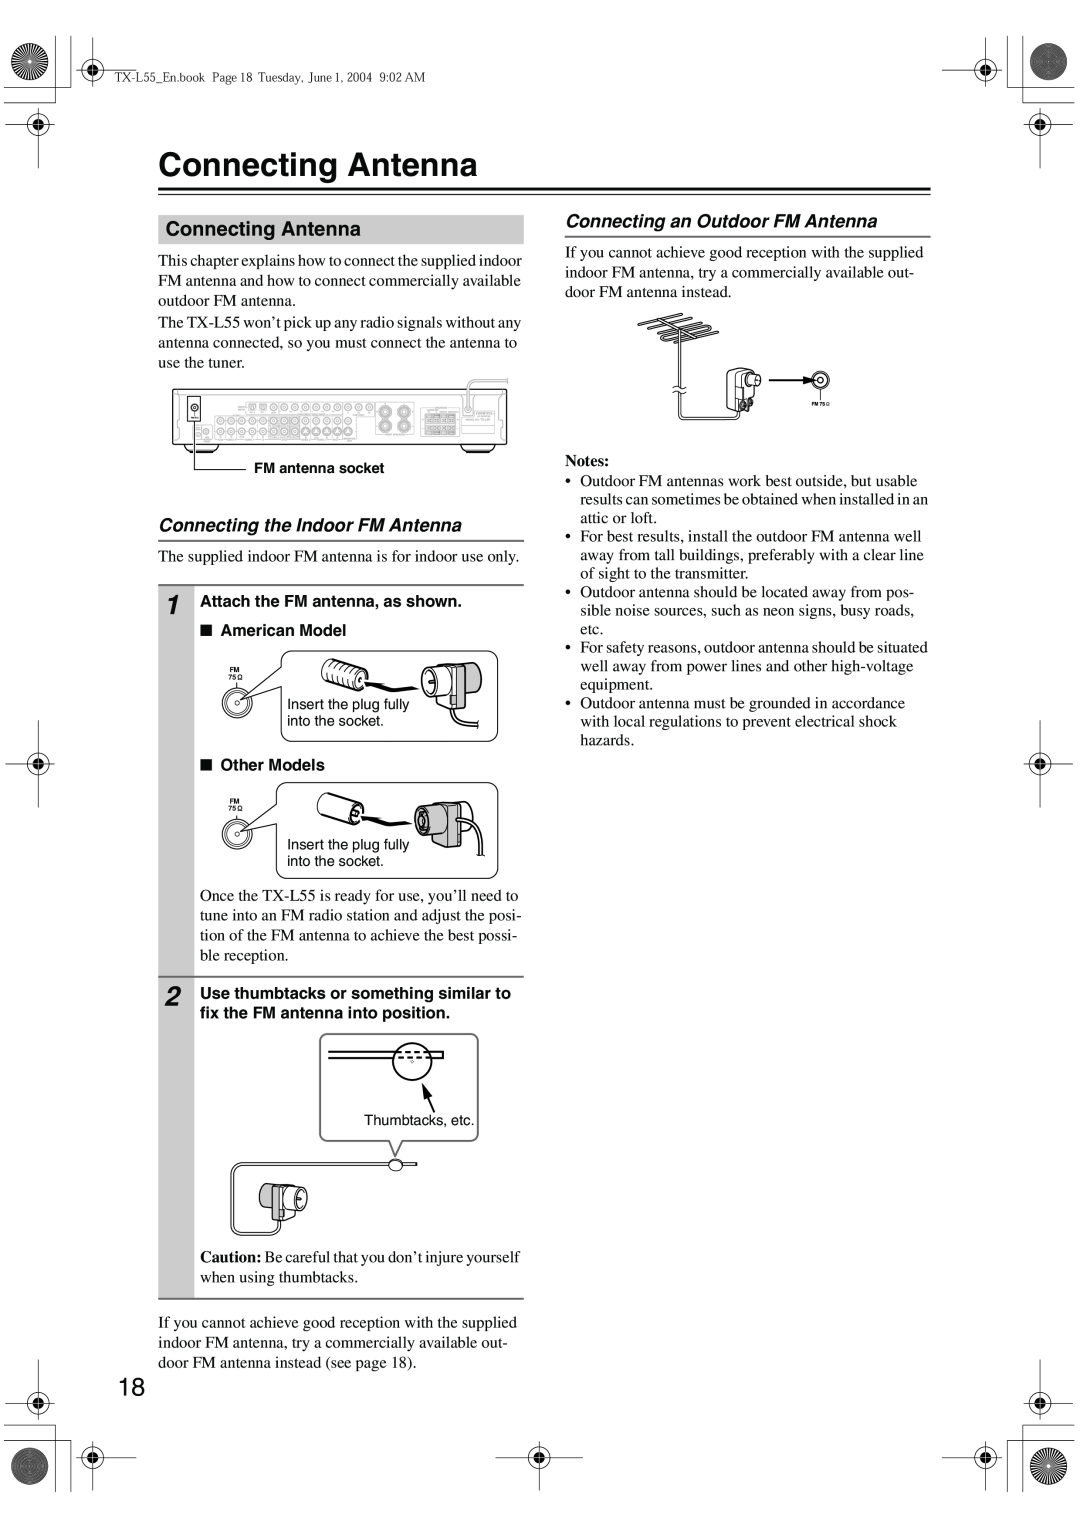 Onkyo TX-L55 instruction manual Connecting Antenna, Connecting an Outdoor FM Antenna, Connecting the Indoor FM Antenna 